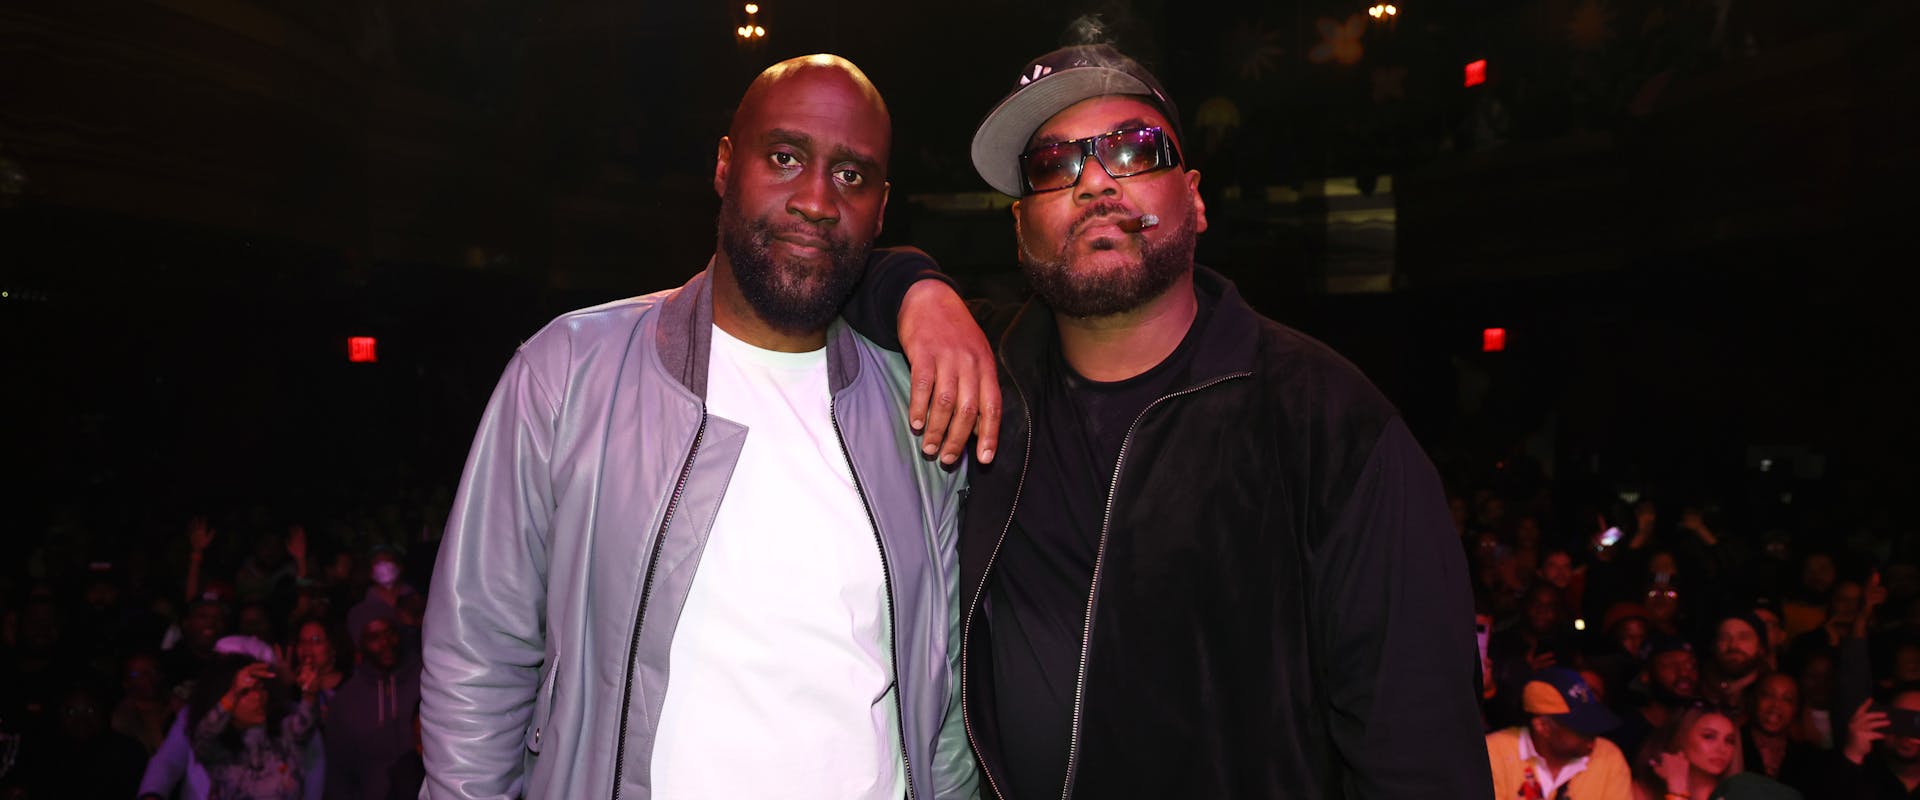 NEW YORK, NEW YORK - MARCH 02: (L-R) Kelvin "Posdnuos" Mercer and Vincent "Maseo" Mason of De La Soul pose onstage at De La Soul’s The DA.I.S.Y. Experience, produced in conjunction with Amazon Music, at Webster Hall on March 02, 2023 in New York City. 